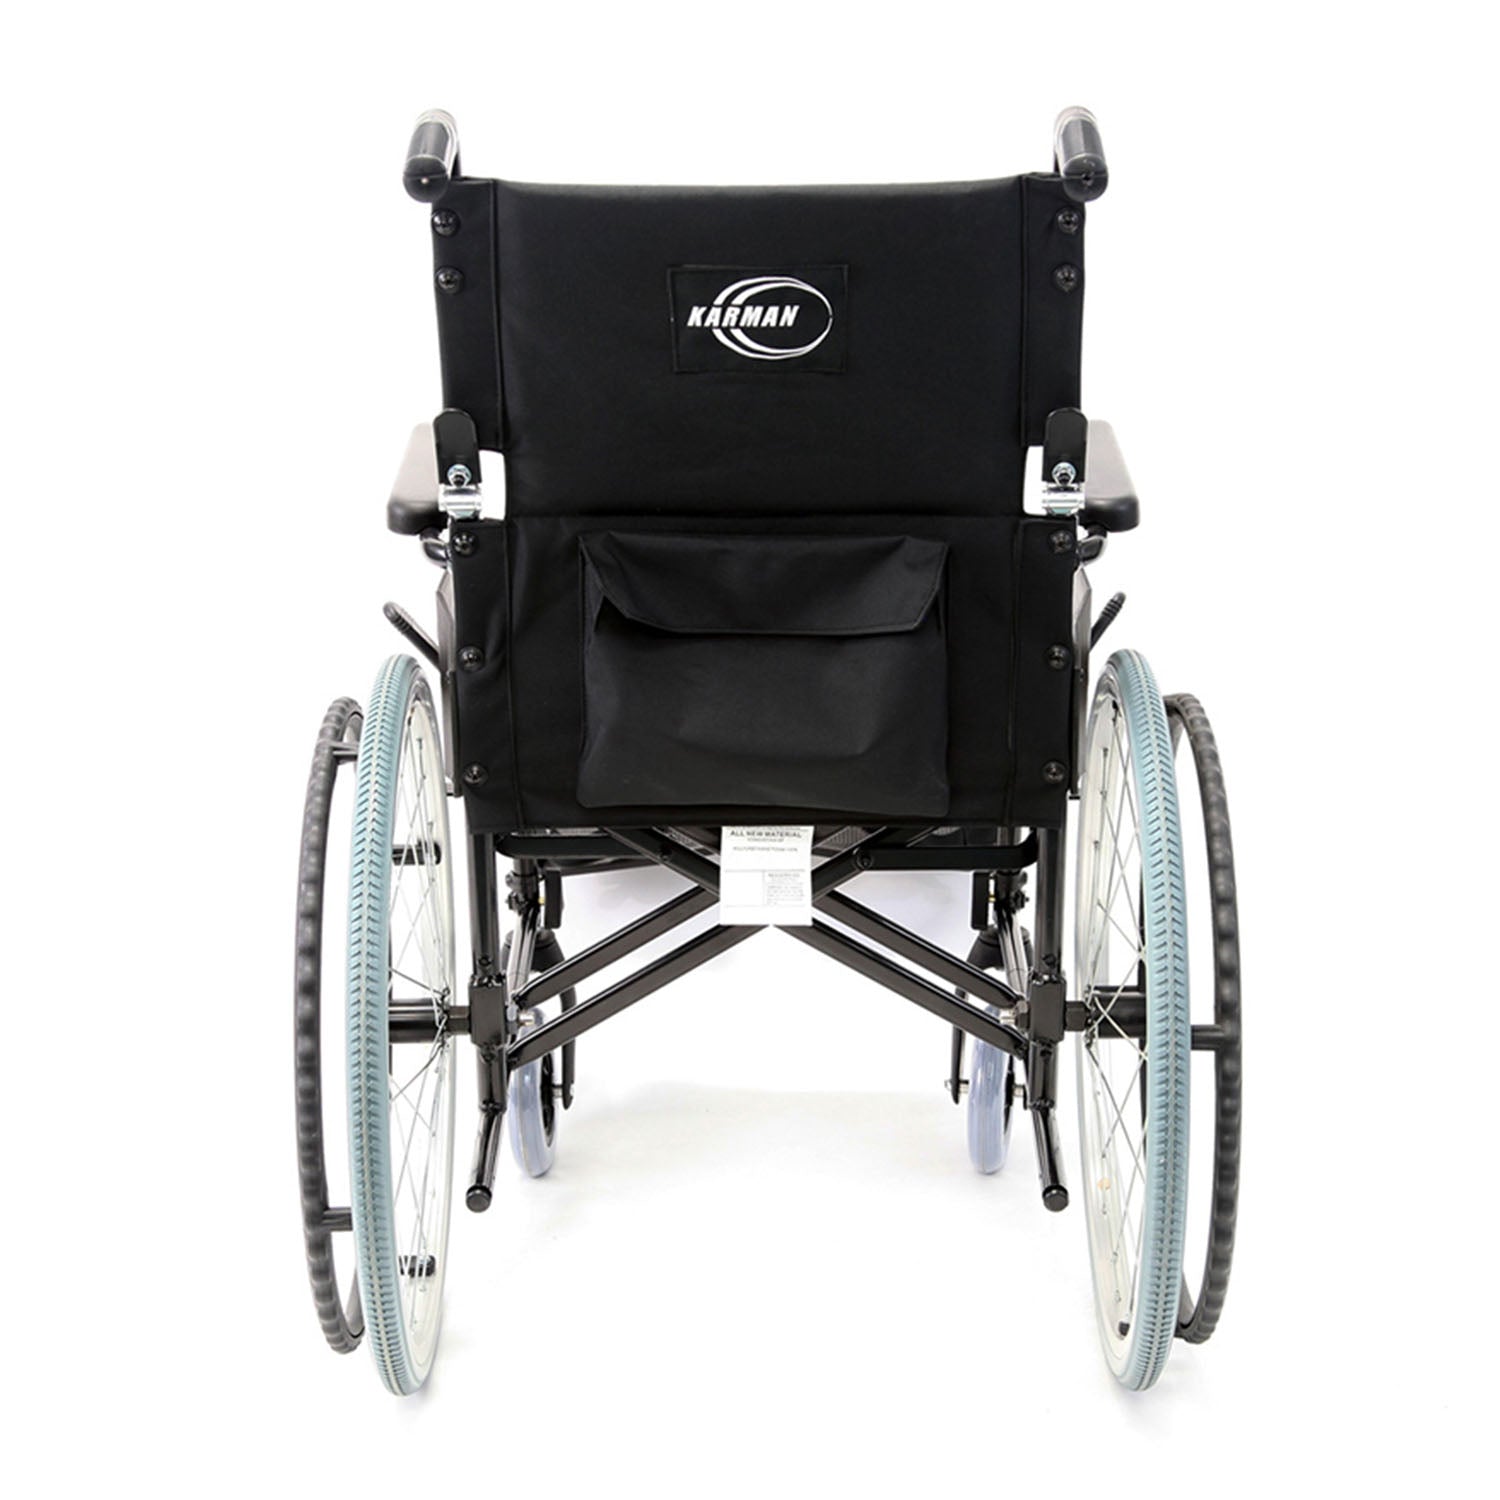 Karman LT-990 18 inch Seat 24 lbs Wheelchair with Quick Release Axles and Elevating Legrest Black Color